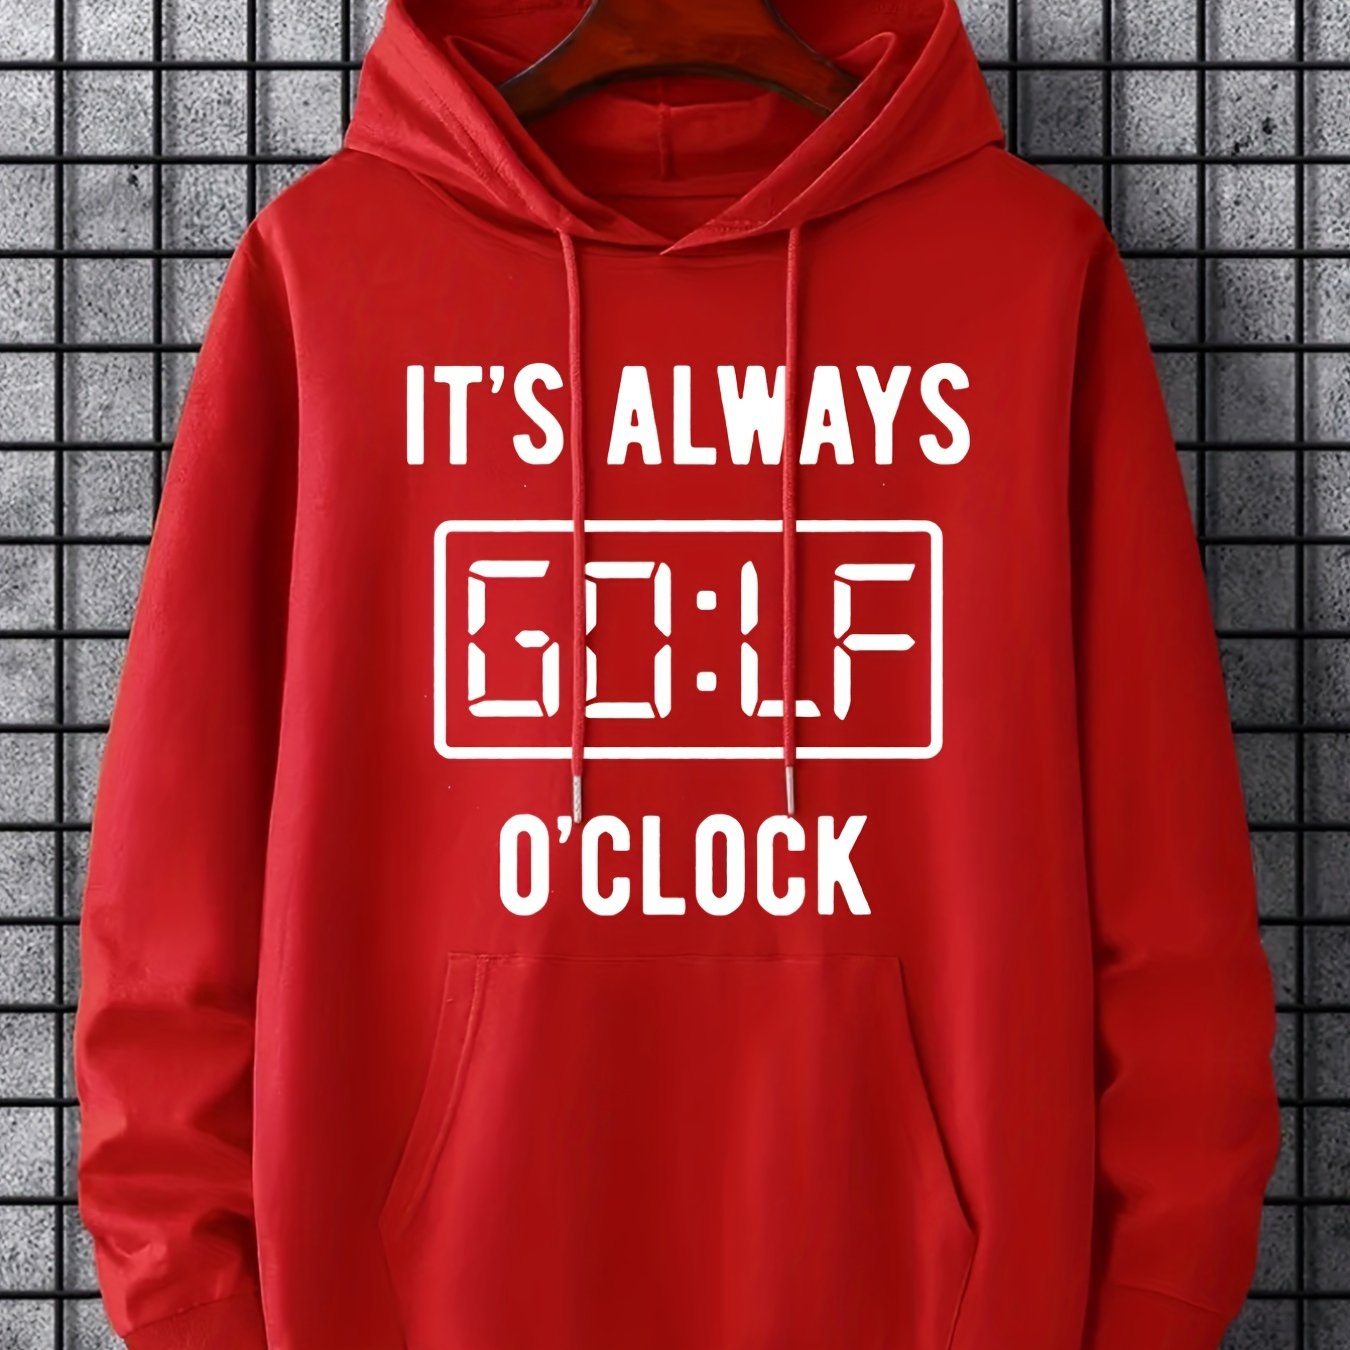 Hoodies For Men, Funny 'Always Golf Clock' Hoodie, Men's Casual Pullover Hooded Sweatshirt With Kangaroo Pocket For Spring Fall, As Gifts